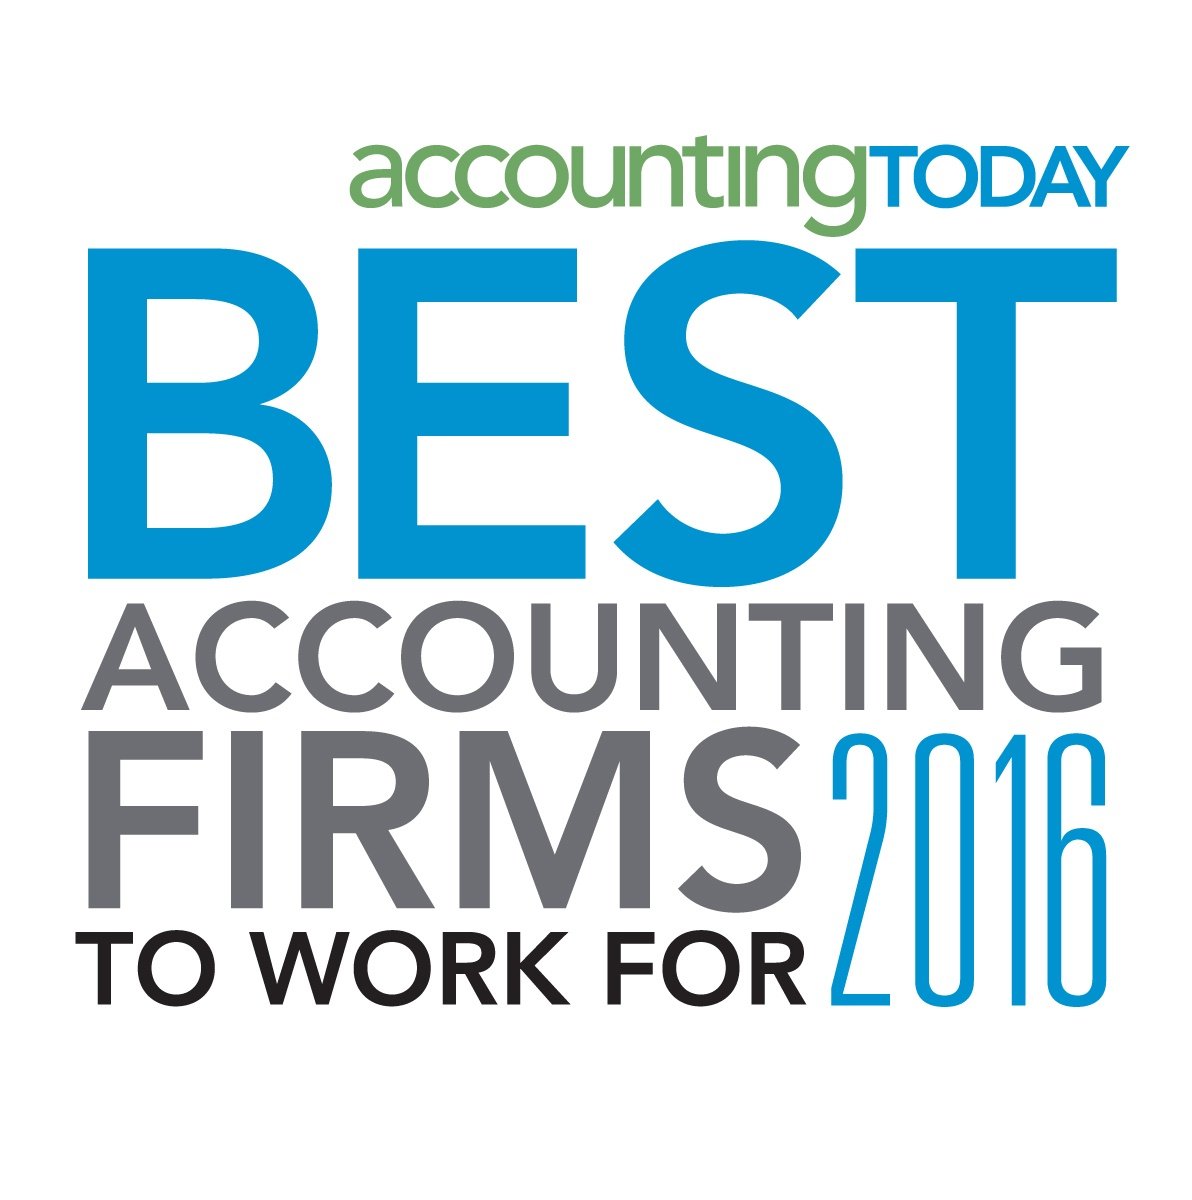 5 Reasons Sweeney Conrad Is One of the Best Accounting Firms to Work For